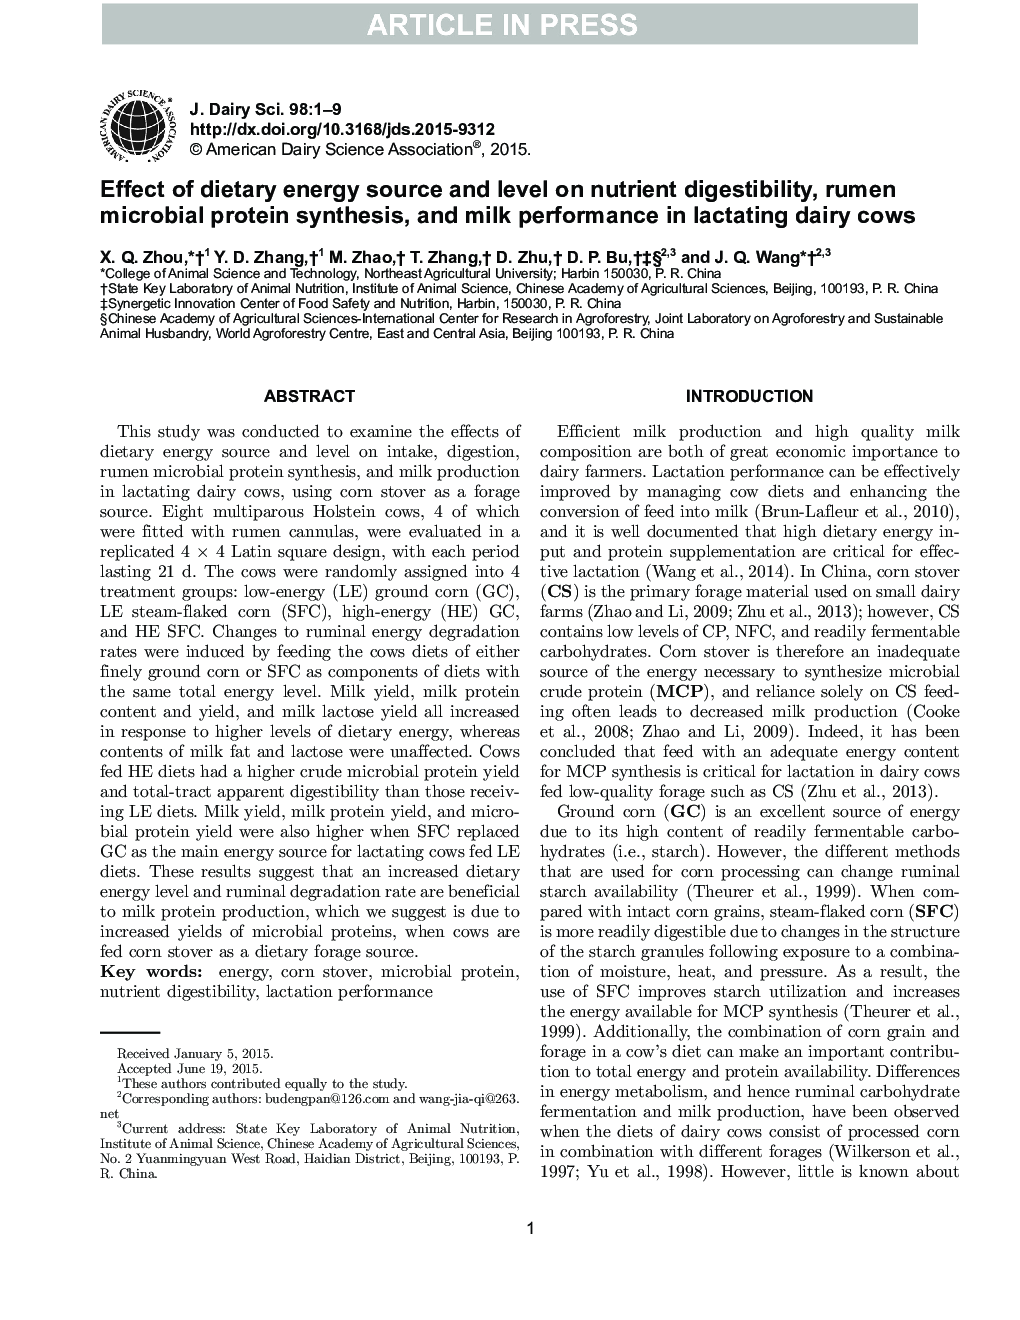 Effect of dietary energy source and level on nutrient digestibility, rumen microbial protein synthesis, and milk performance in lactating dairy cows